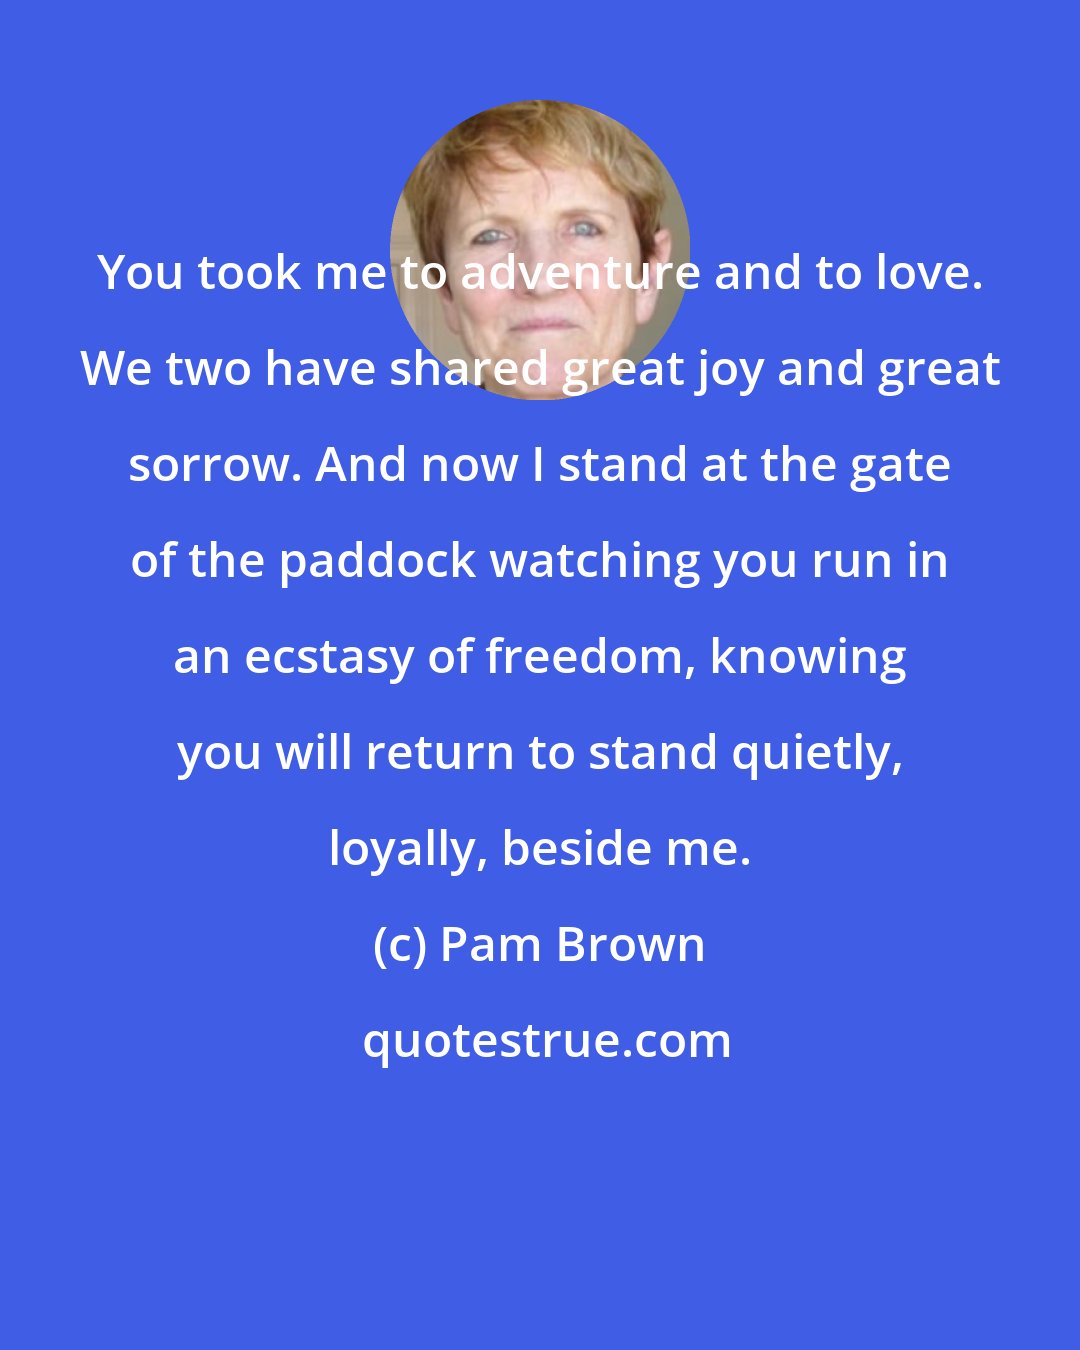 Pam Brown: You took me to adventure and to love. We two have shared great joy and great sorrow. And now I stand at the gate of the paddock watching you run in an ecstasy of freedom, knowing you will return to stand quietly, loyally, beside me.